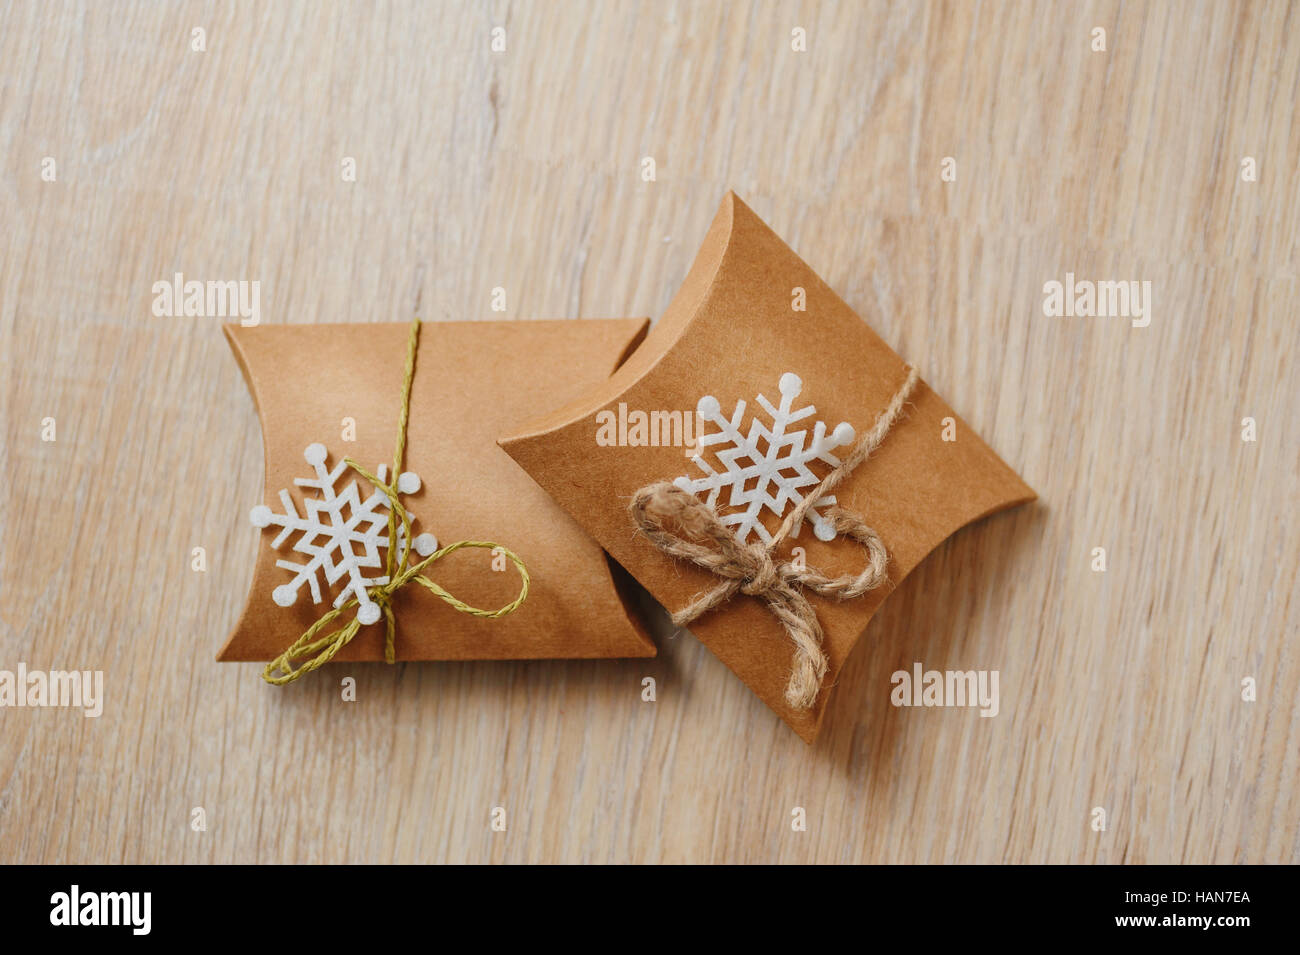 Cute Gift Box Wrapped Craft Paper Stock Photo 618015917